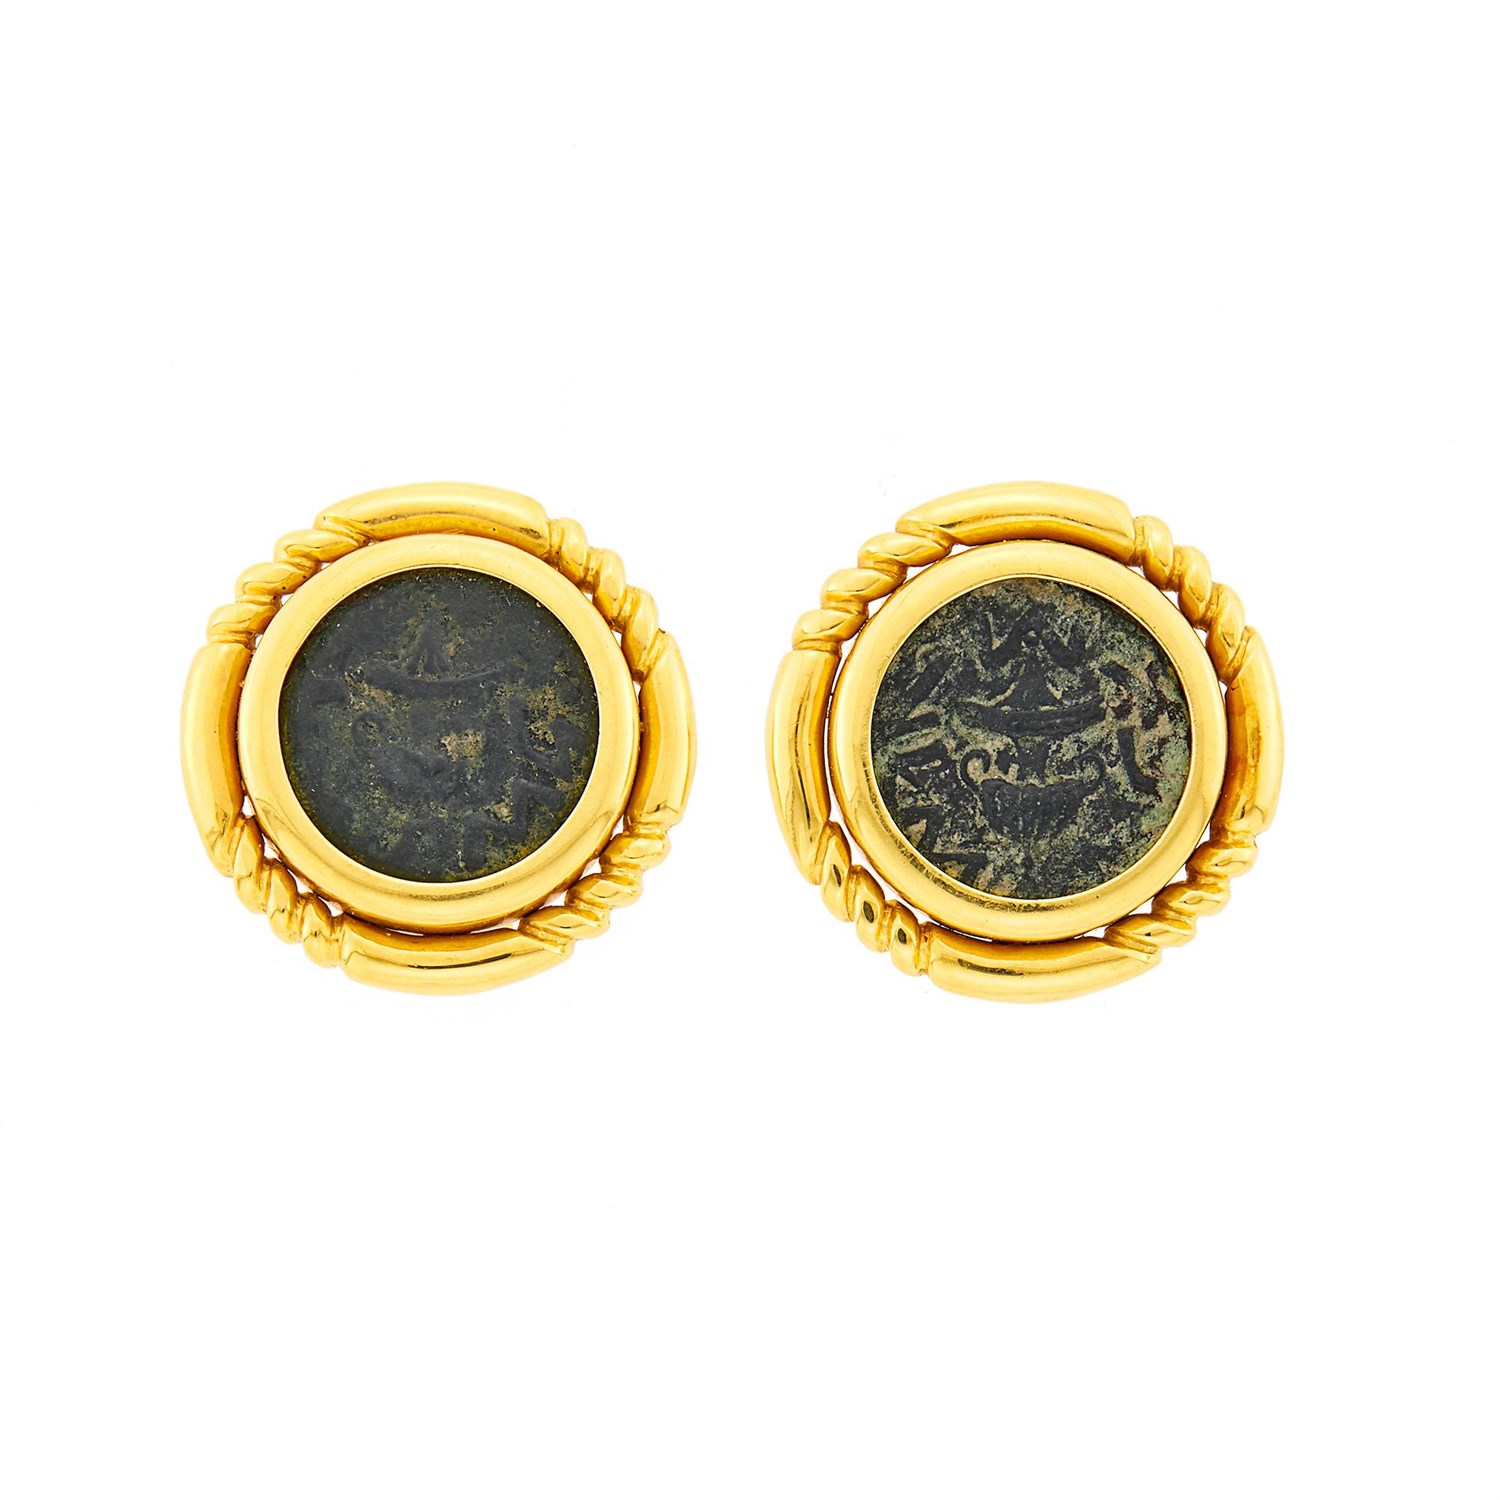 Lot 1012 - Pair of Gold and Bronze Coin Earrings